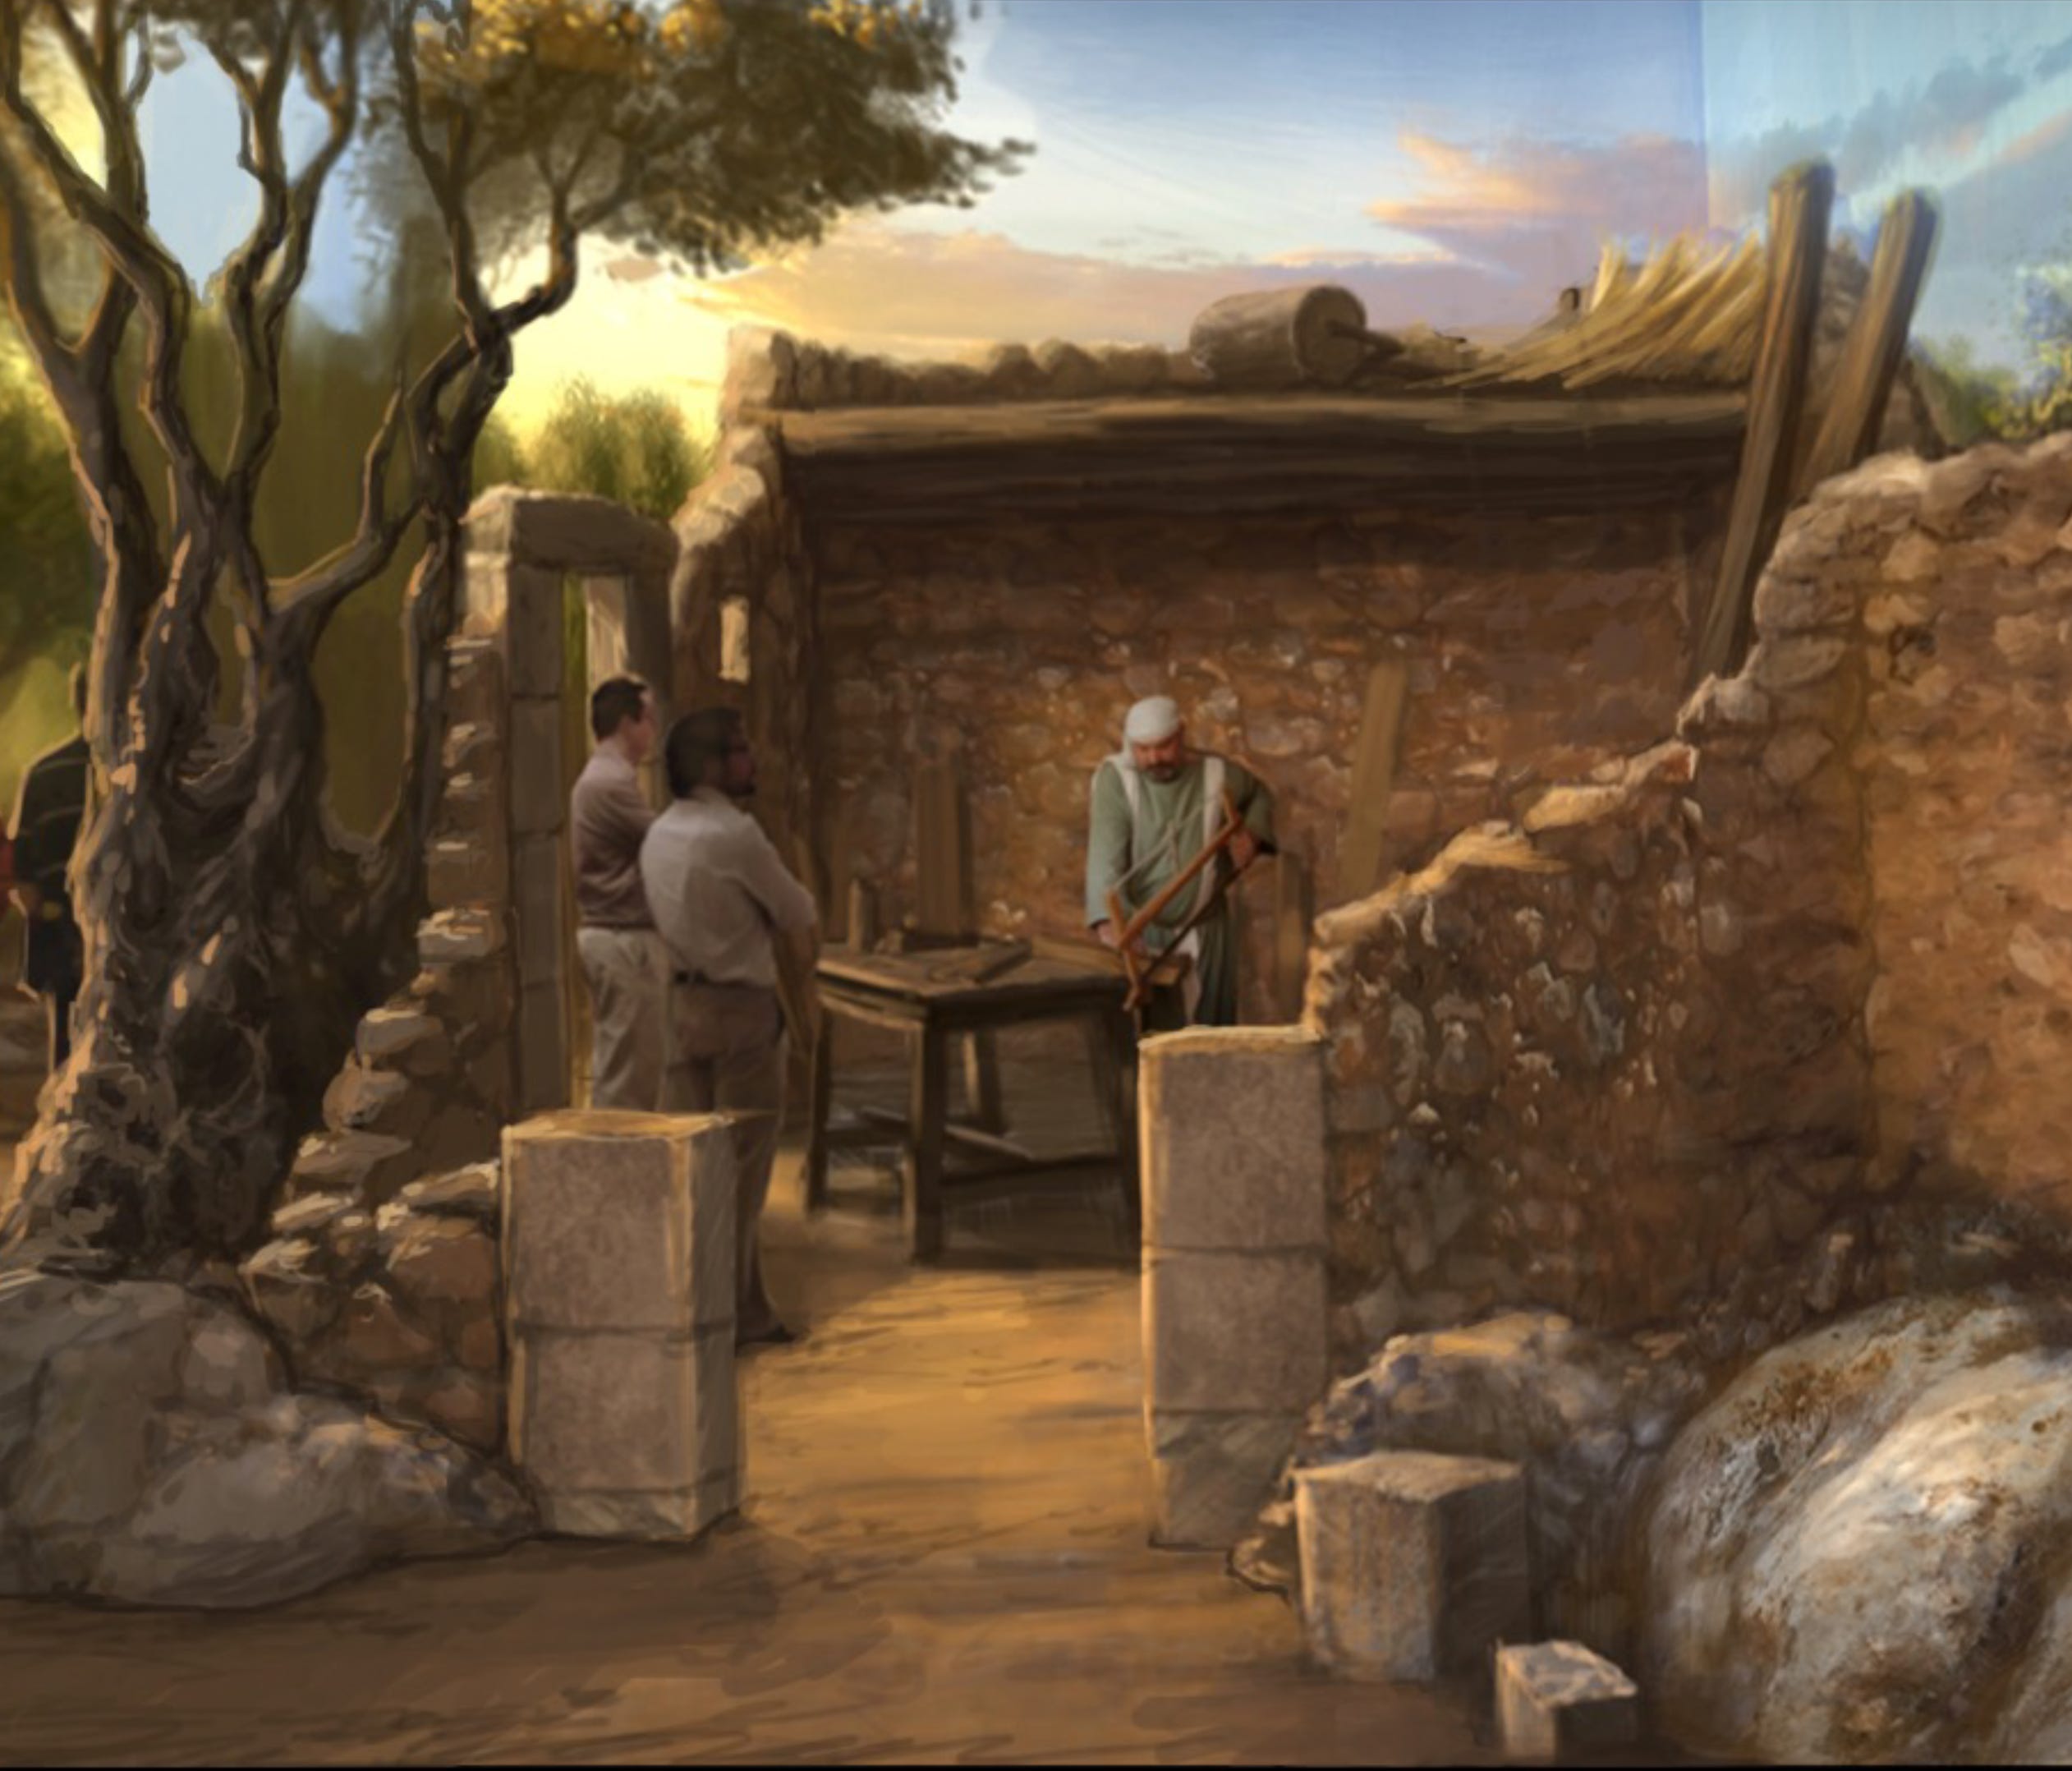 A completely immersive themed environment called The World of Jesus of Nazareth transports guests to a meticulous re-creation of a first-century village.